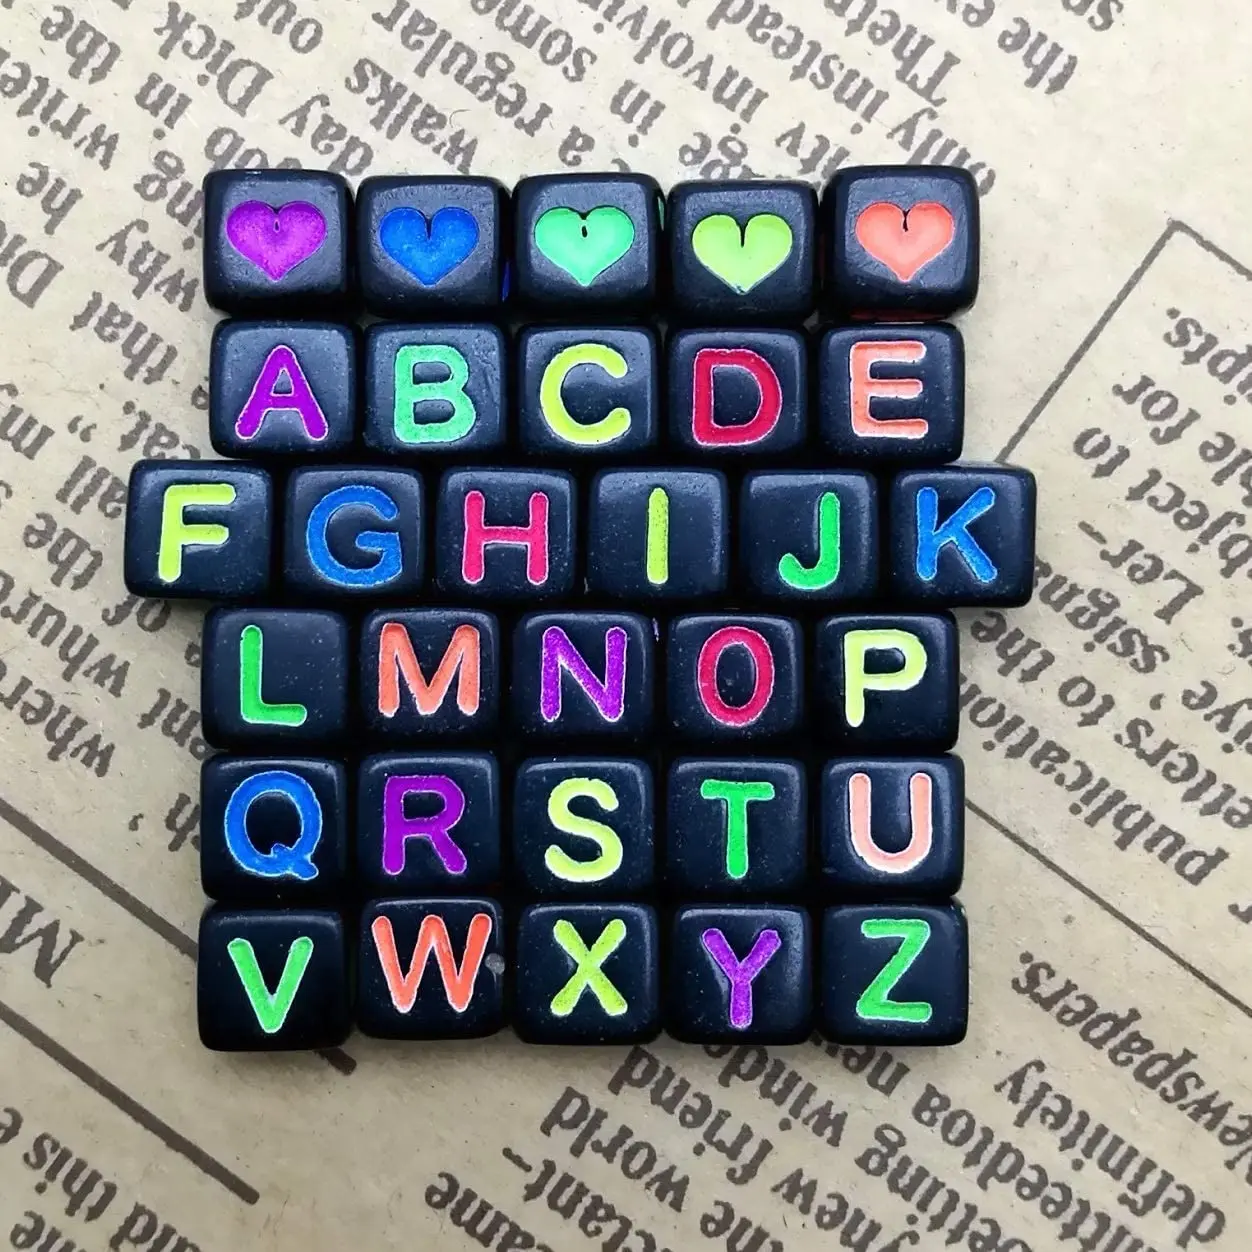 Wholesale Acrylic Alphabet Letter Beads Randomly Mixed For Jewelry Bracelets Making Black Cube With neon Color Letter